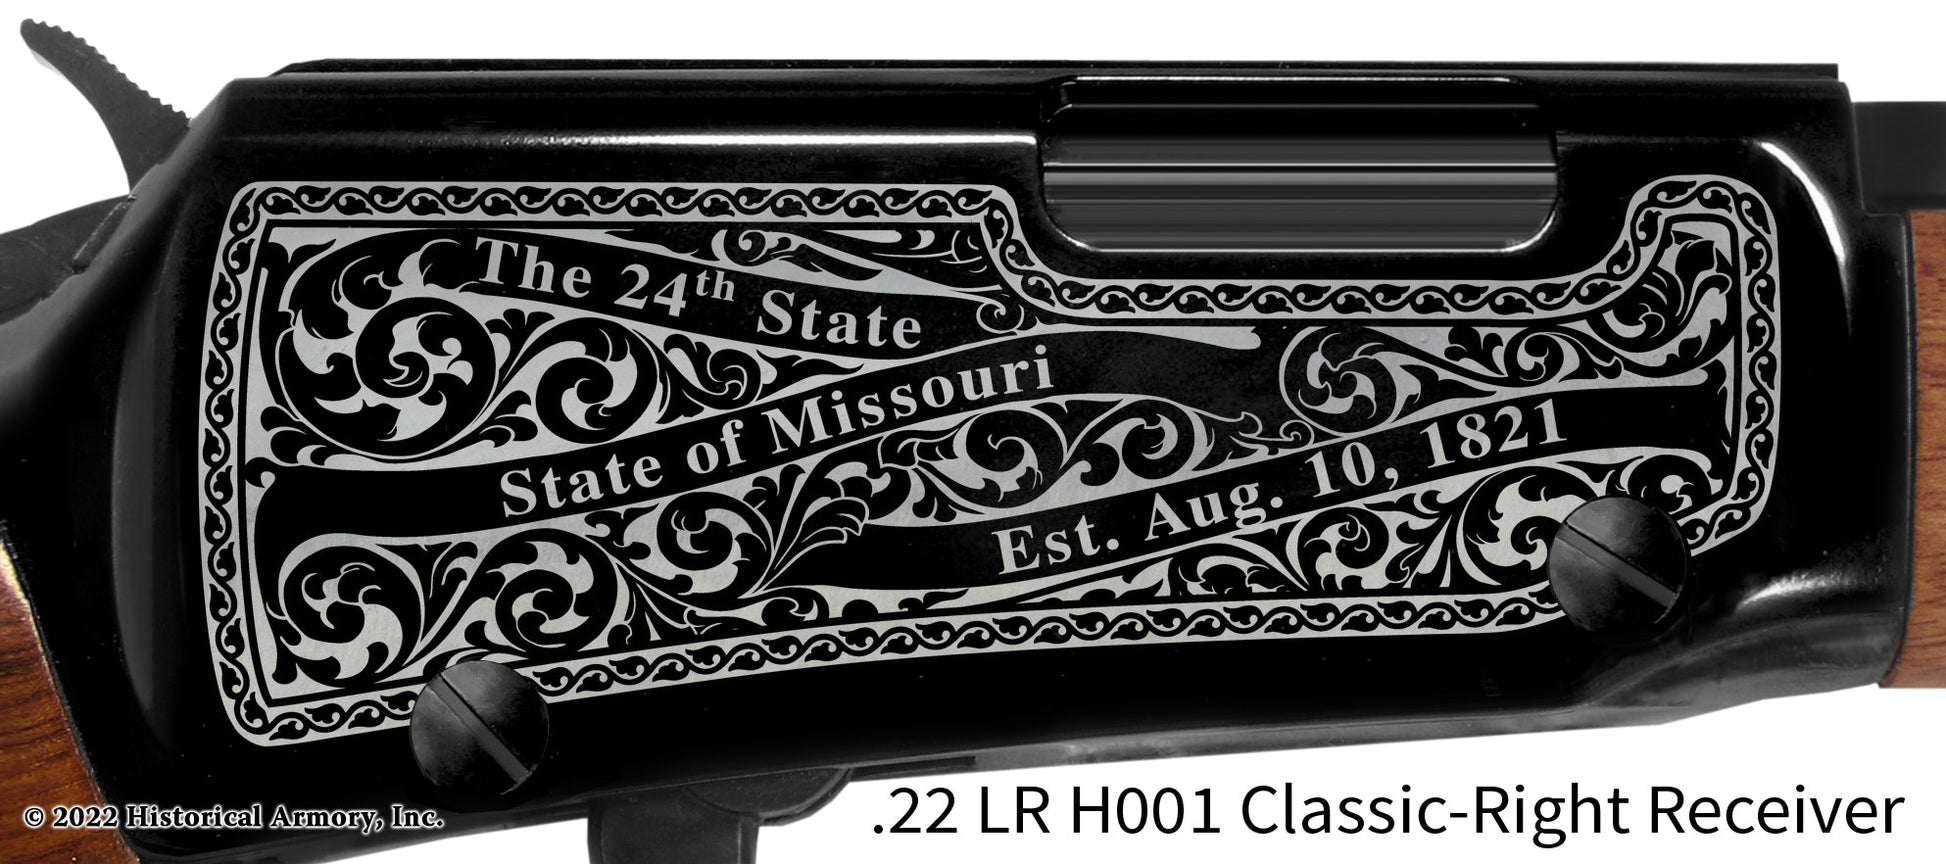 Perry County Missouri Engraved Henry H001 Rifle